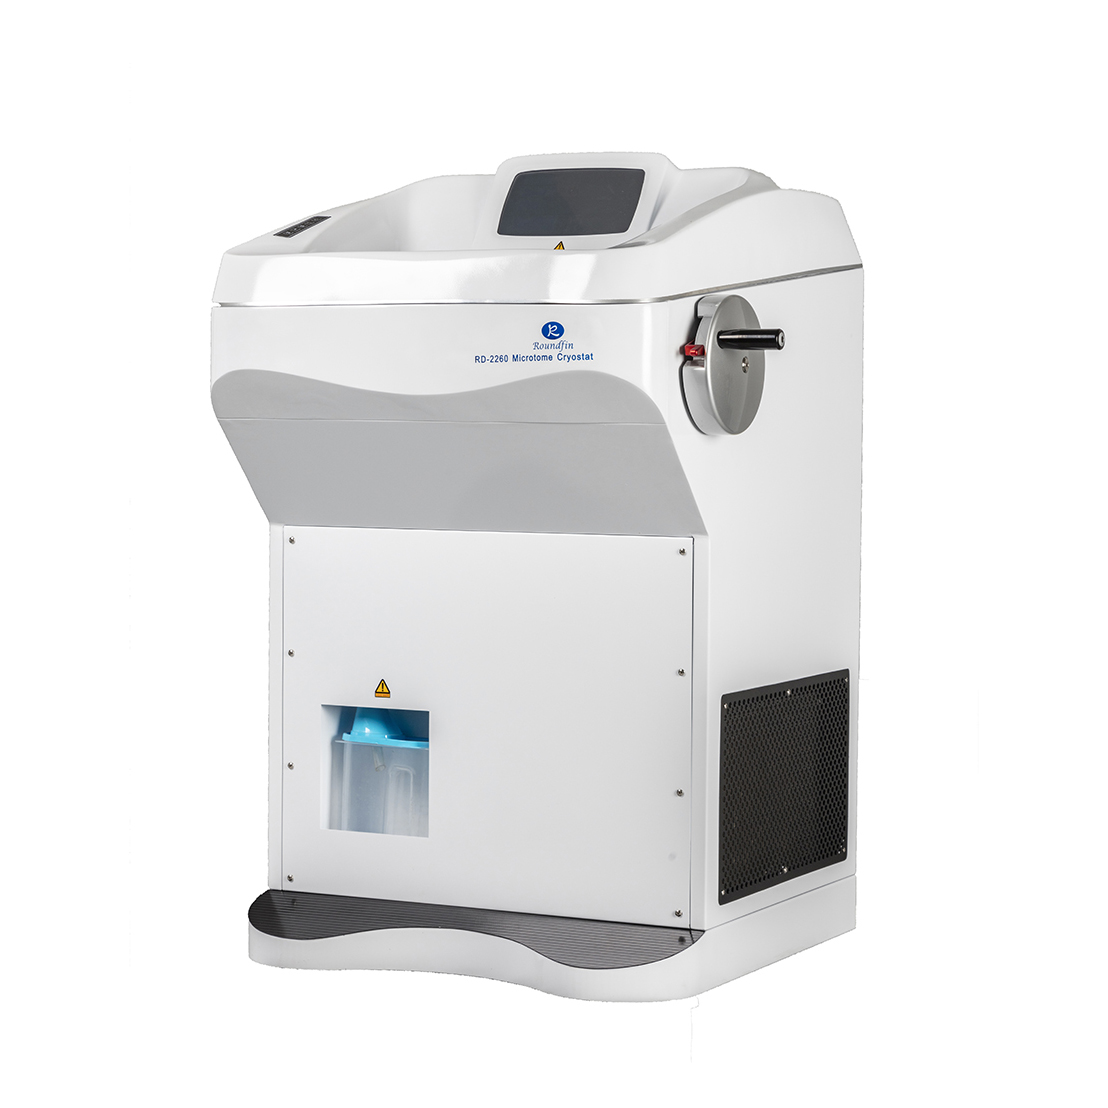 Roundfin clinical analytical instruments RD-2260 pathology cryostat microtome Manufacturers, Roundfin clinical analytical instruments RD-2260 pathology cryostat microtome Factory, Supply Roundfin clinical analytical instruments RD-2260 pathology cryostat microtome